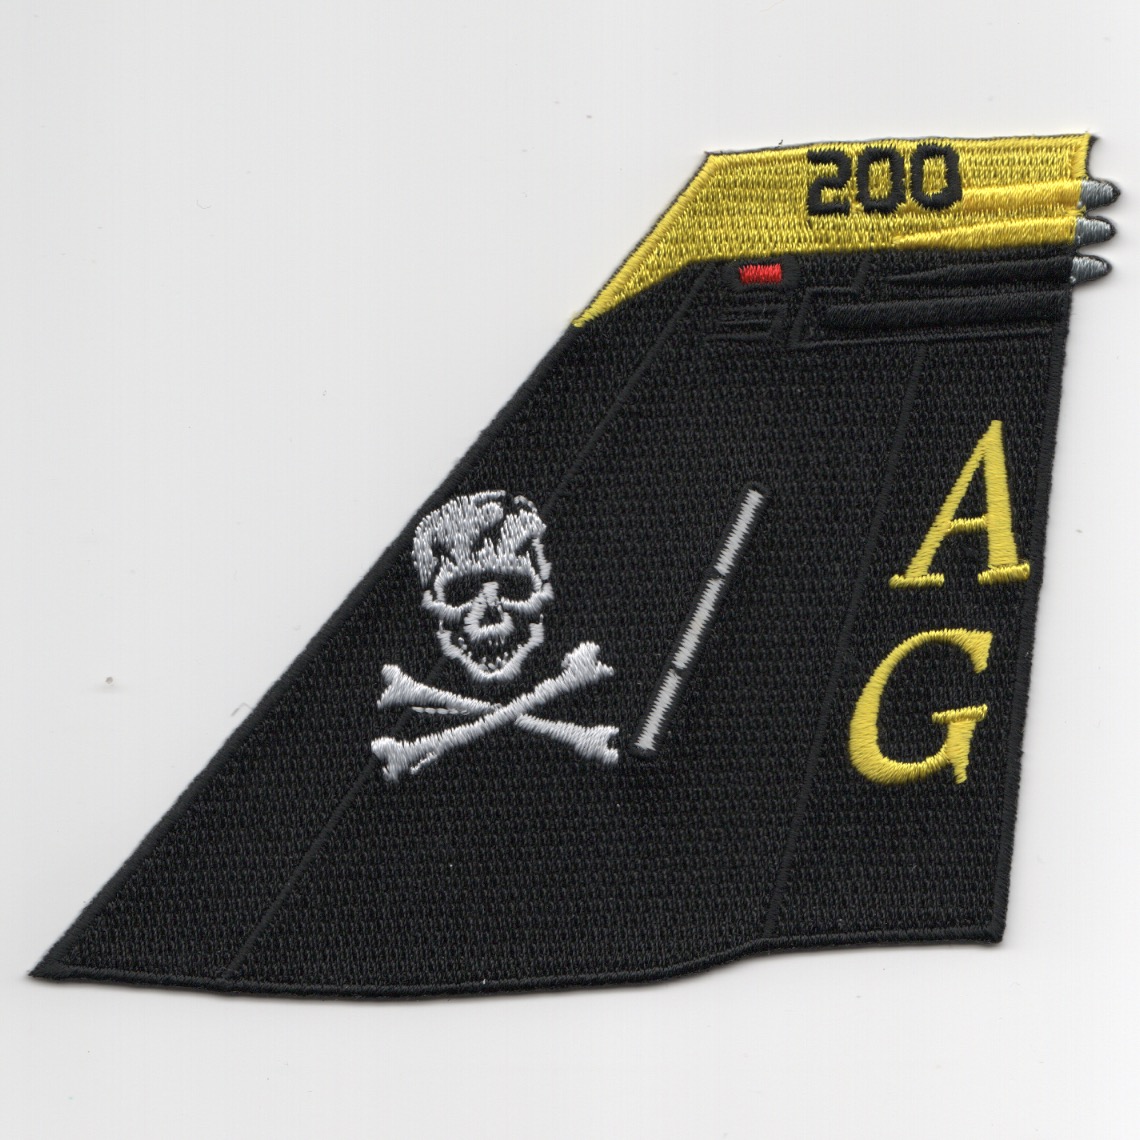 VFA-103 'AG' TAILFIN Patch (Black/Yellow Tip)